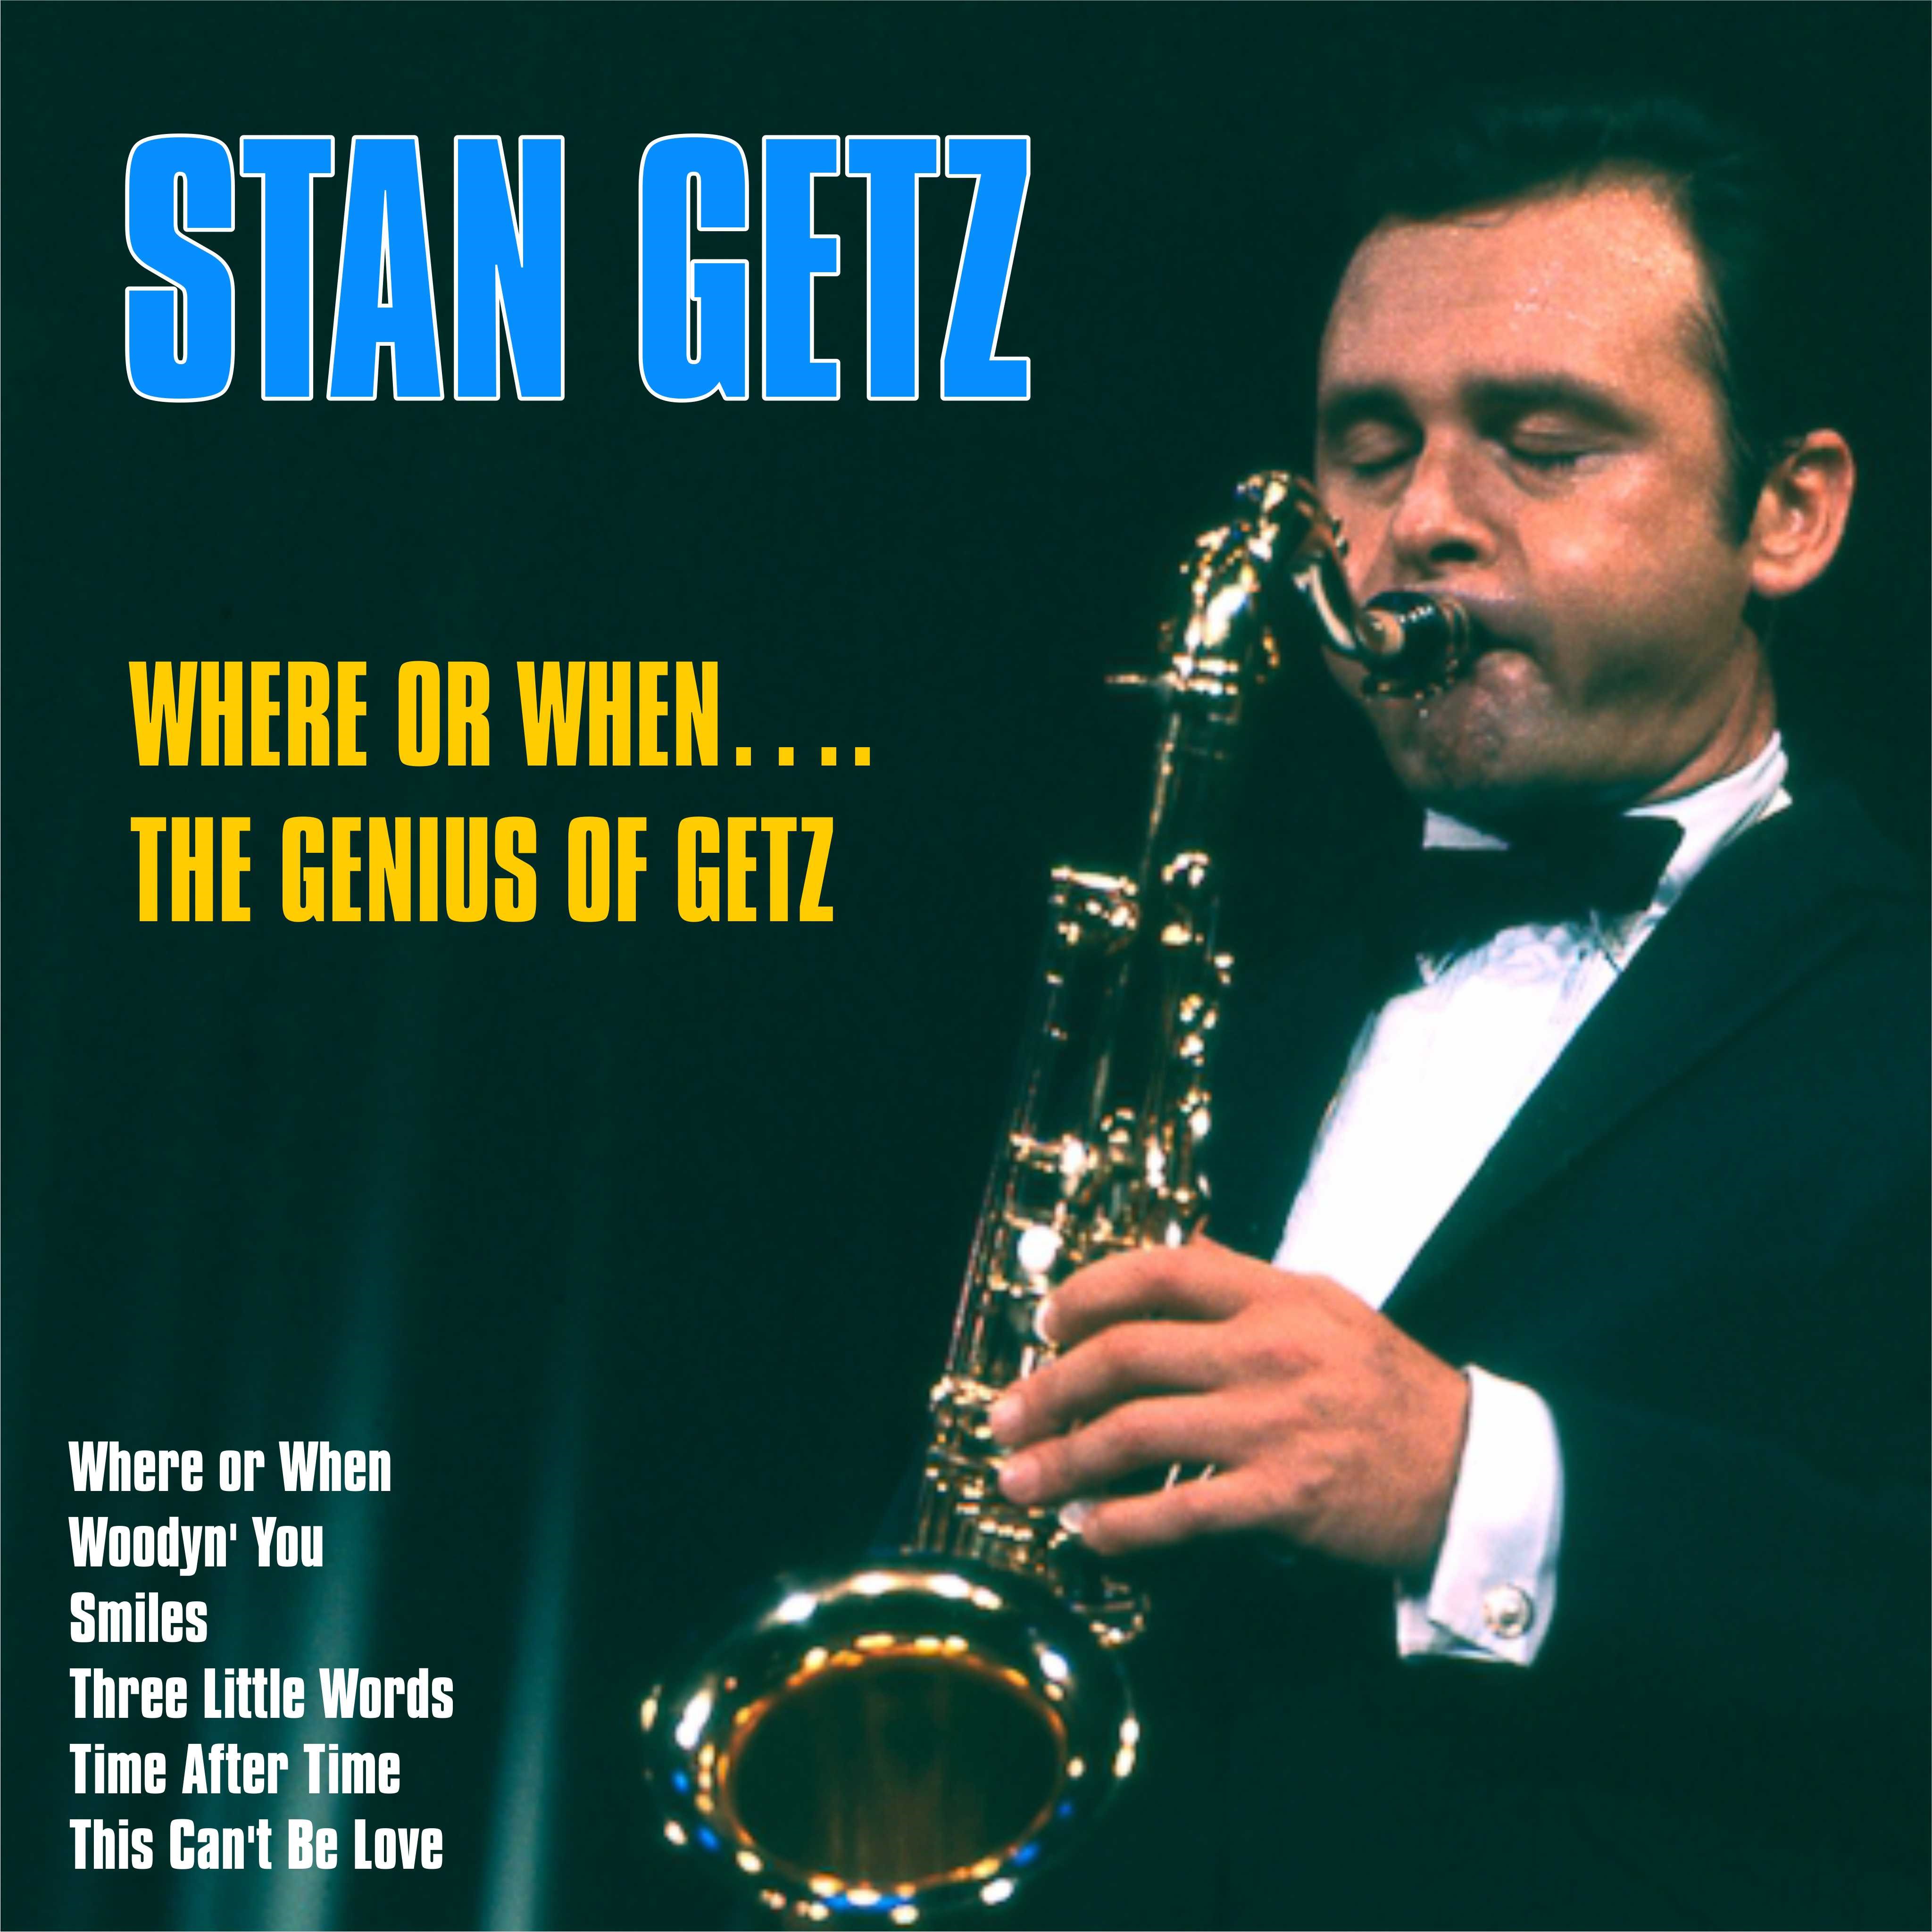 Where Or When. The Genius of Getz